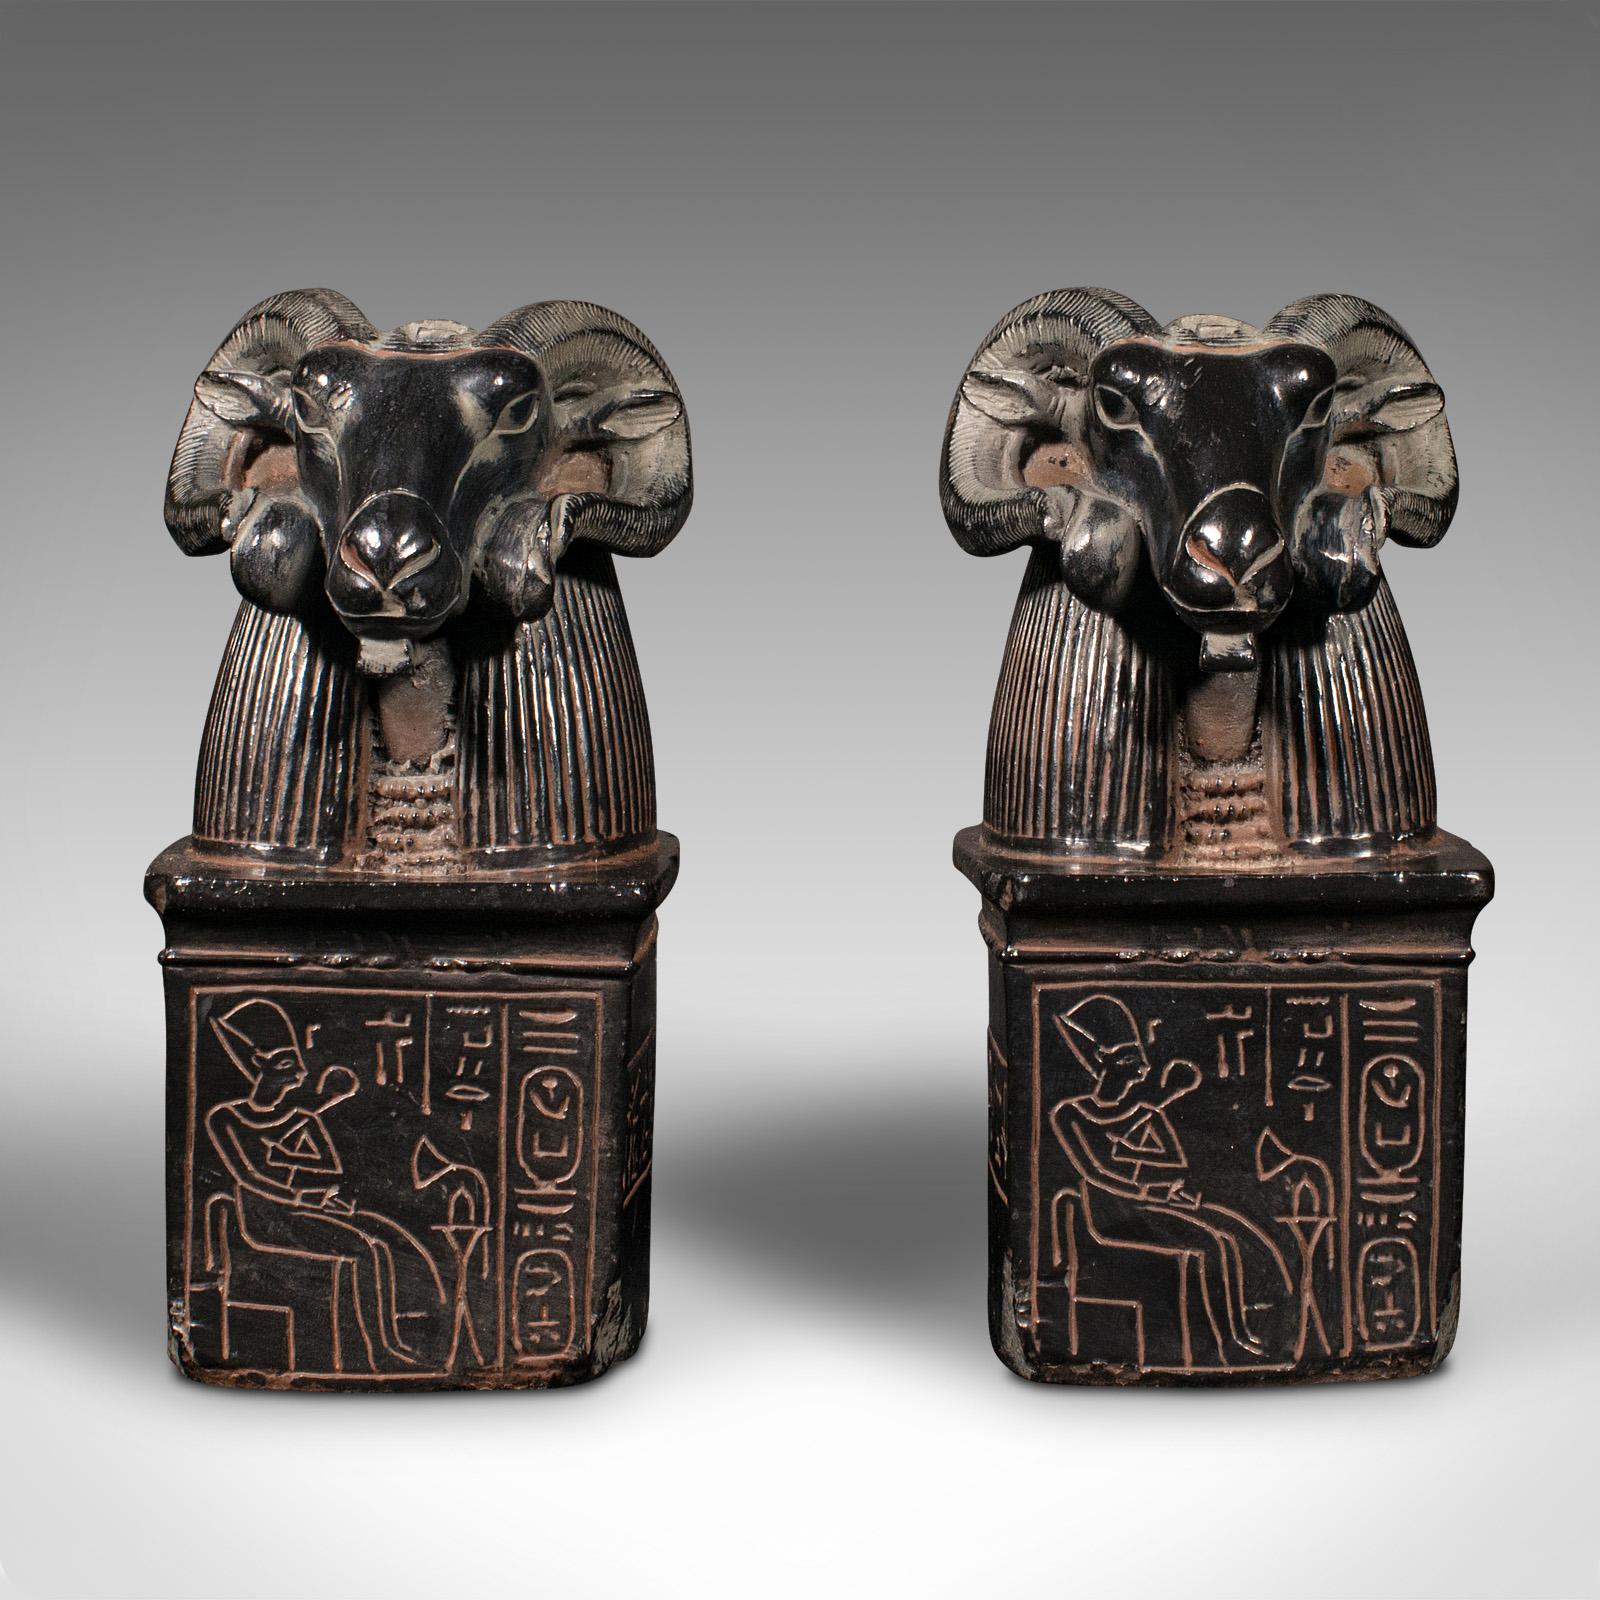 This is a pair of vintage Amun statuary bookends. An Egyptian, stone resin decorative book rest of historic interest, dating to the late 20th century.

Pleasingly weighted, quality bookends with a depiction of the Ram God, Amun
Displaying a